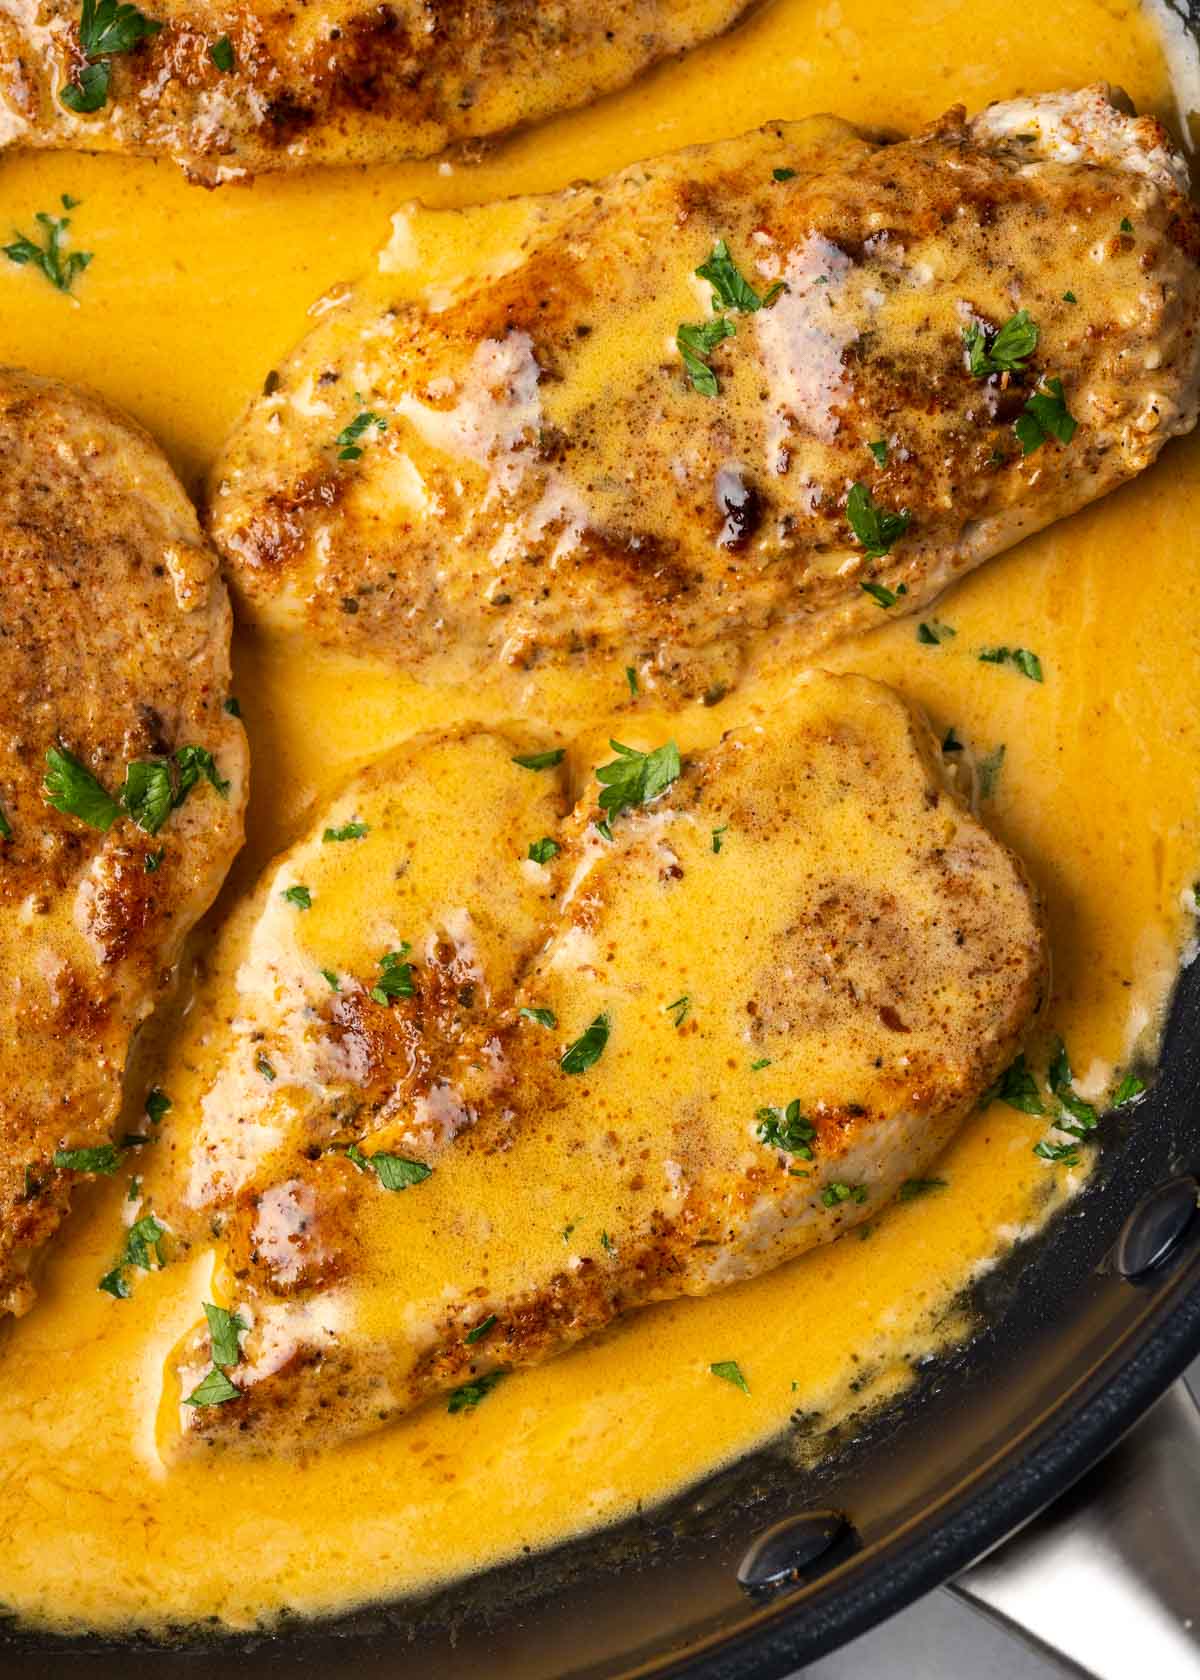 This Chicken Lazone recipe is a Cajun classic. Tender chicken breasts are smothered in a creamy sauce that has just the right amount of heat! This recipe is packed with delicious flavor and incredible texture. Whether you're cooking for guests or preparing a weeknight meal this is great dish that is ready in less than 30 minutes!